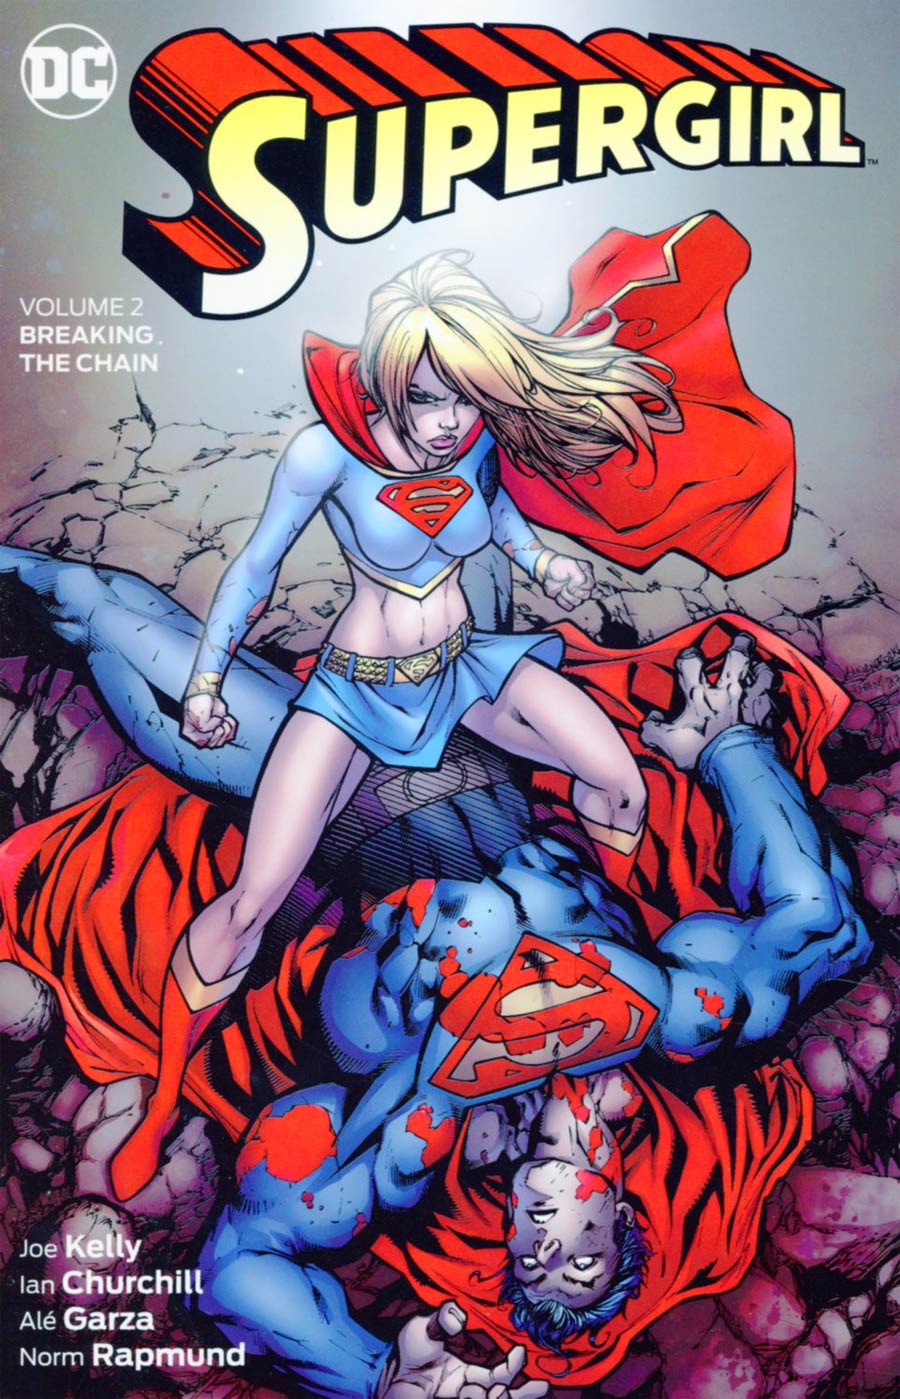 Supergirl Vol 2 Breaking The Chain TP